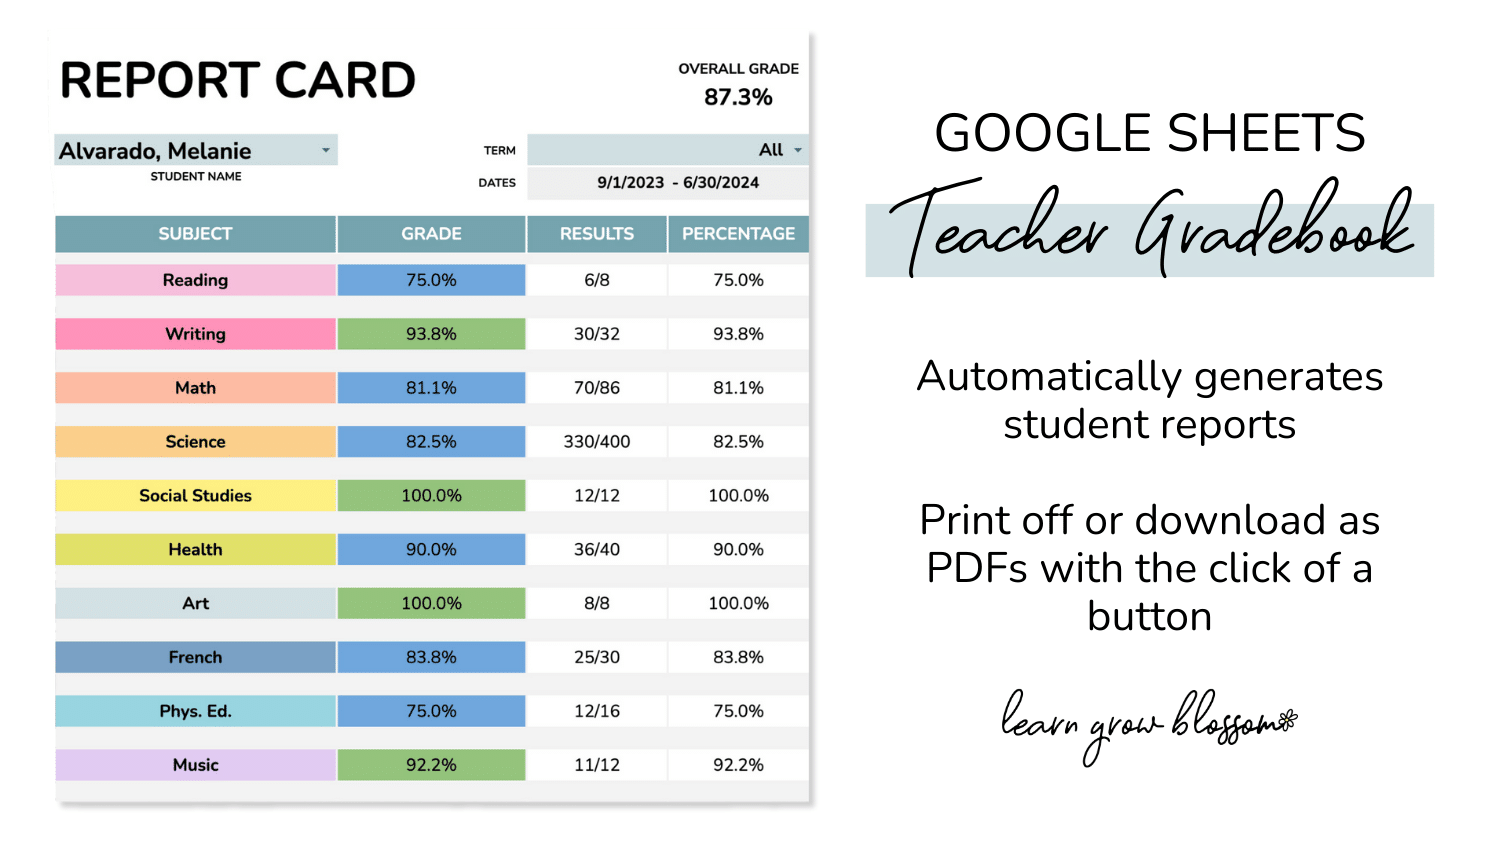 Google Sheets Gradebook Template automatically generated student reports. Print them off or download them as PDFs with the click of a button. Showing a screenshot of the student report card in Google Sheets.